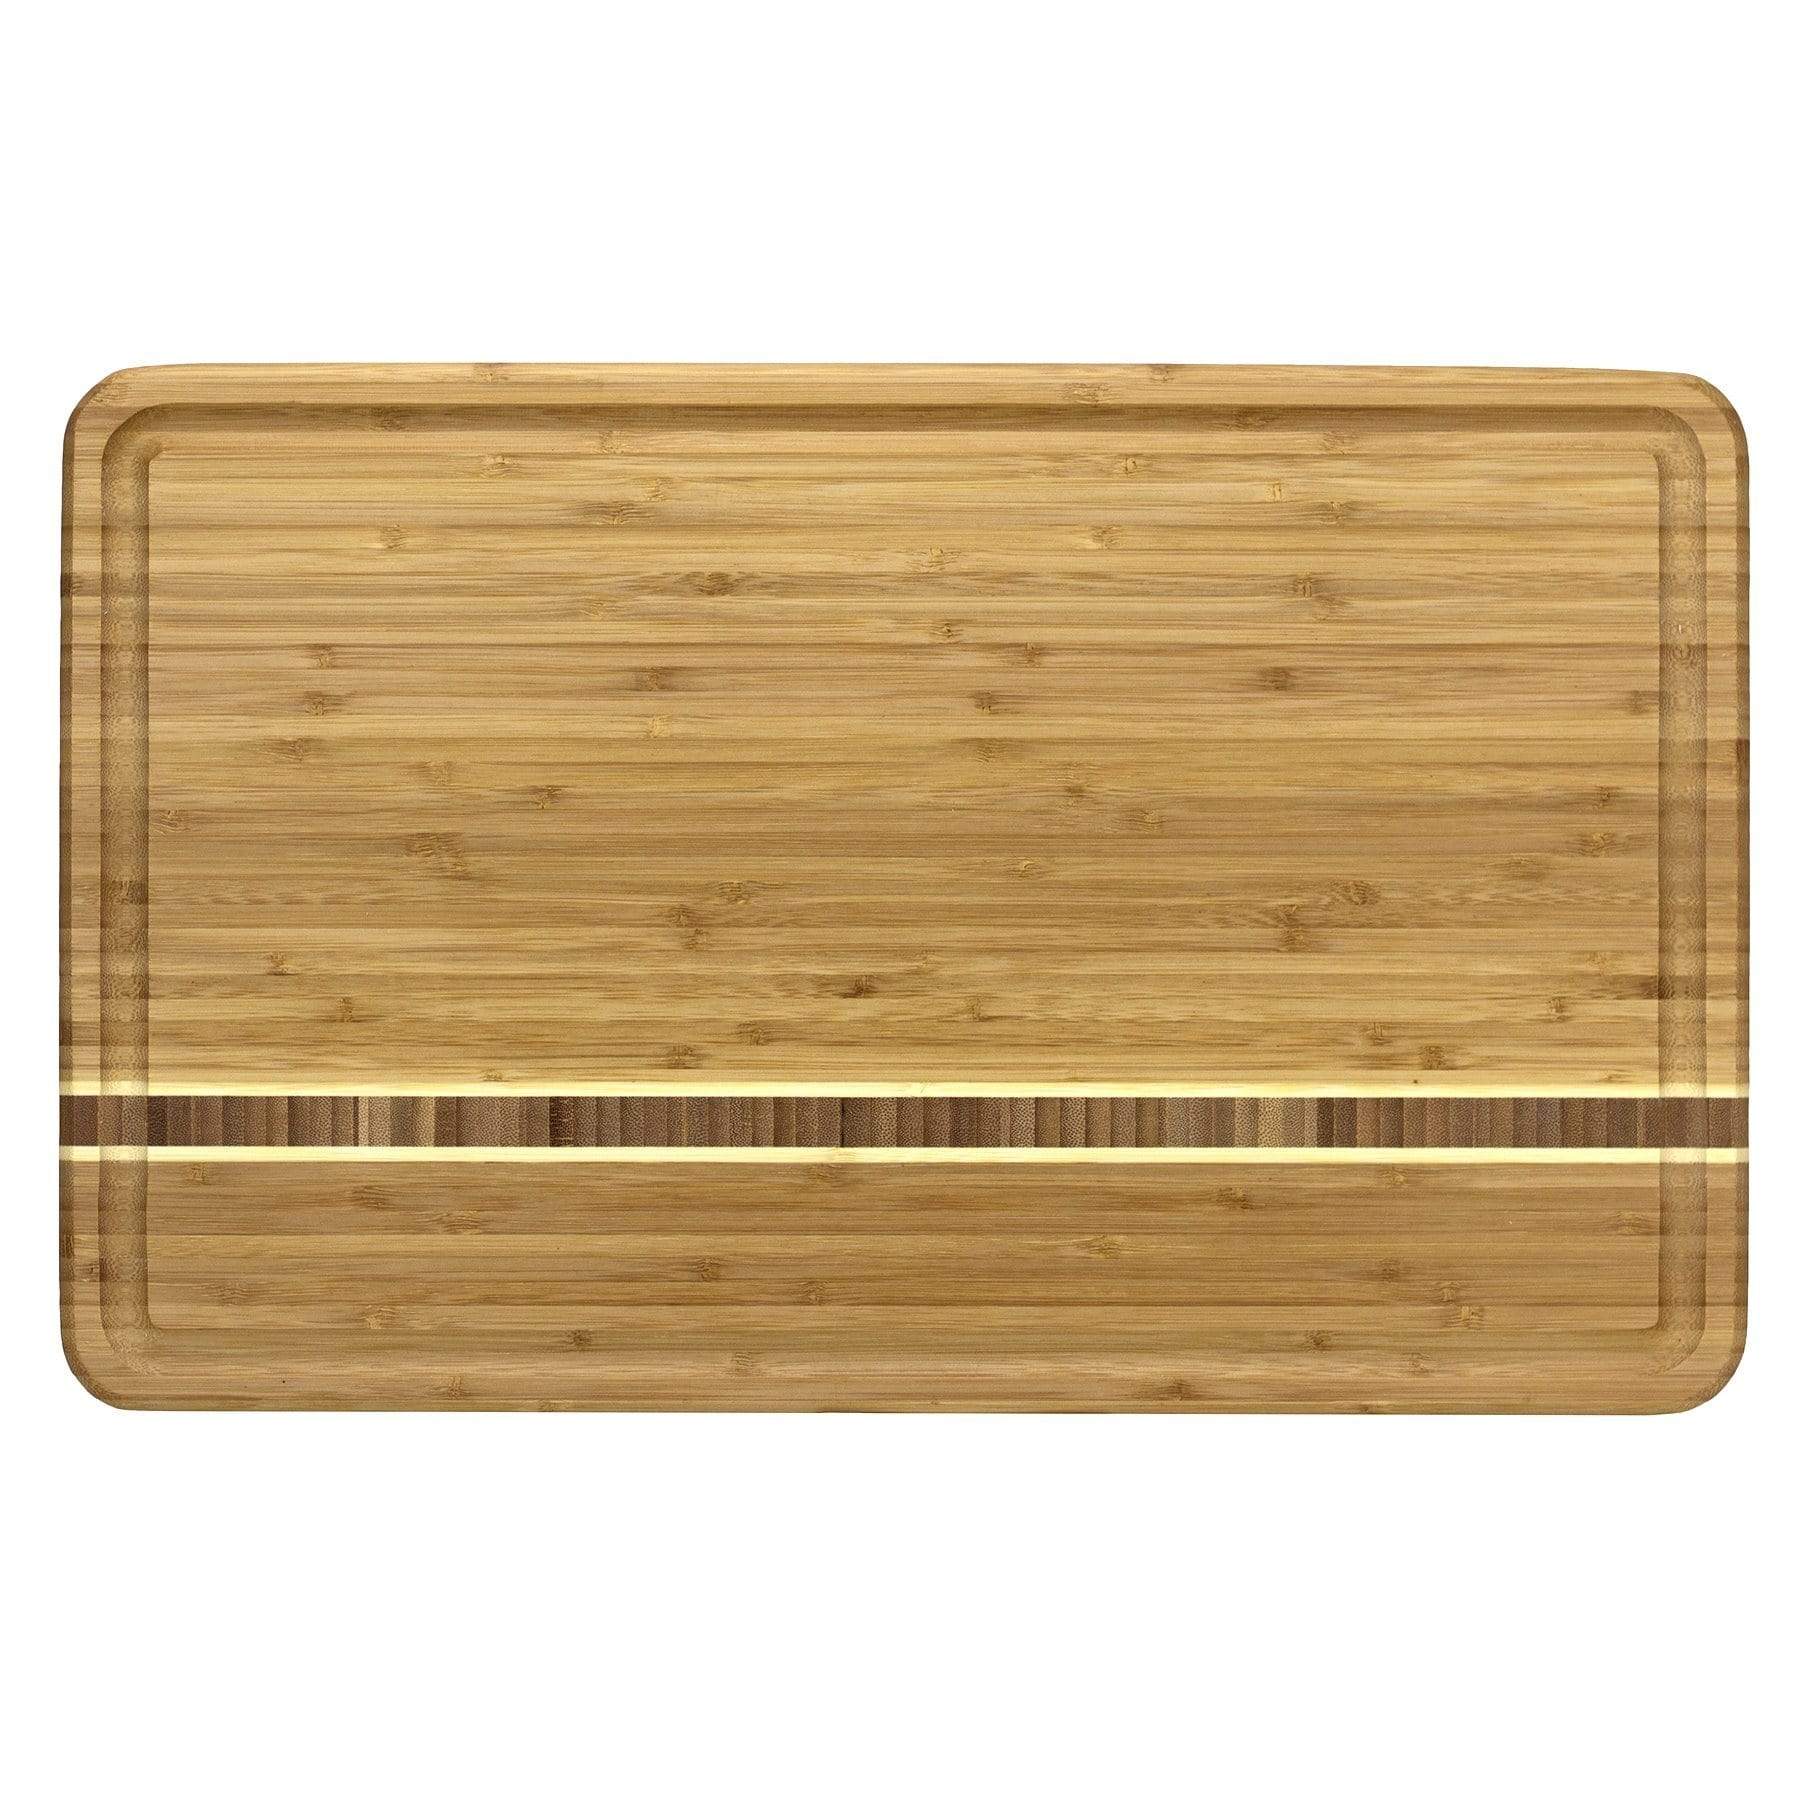 Competition BBQ Cutting Board – Bison Woodworking